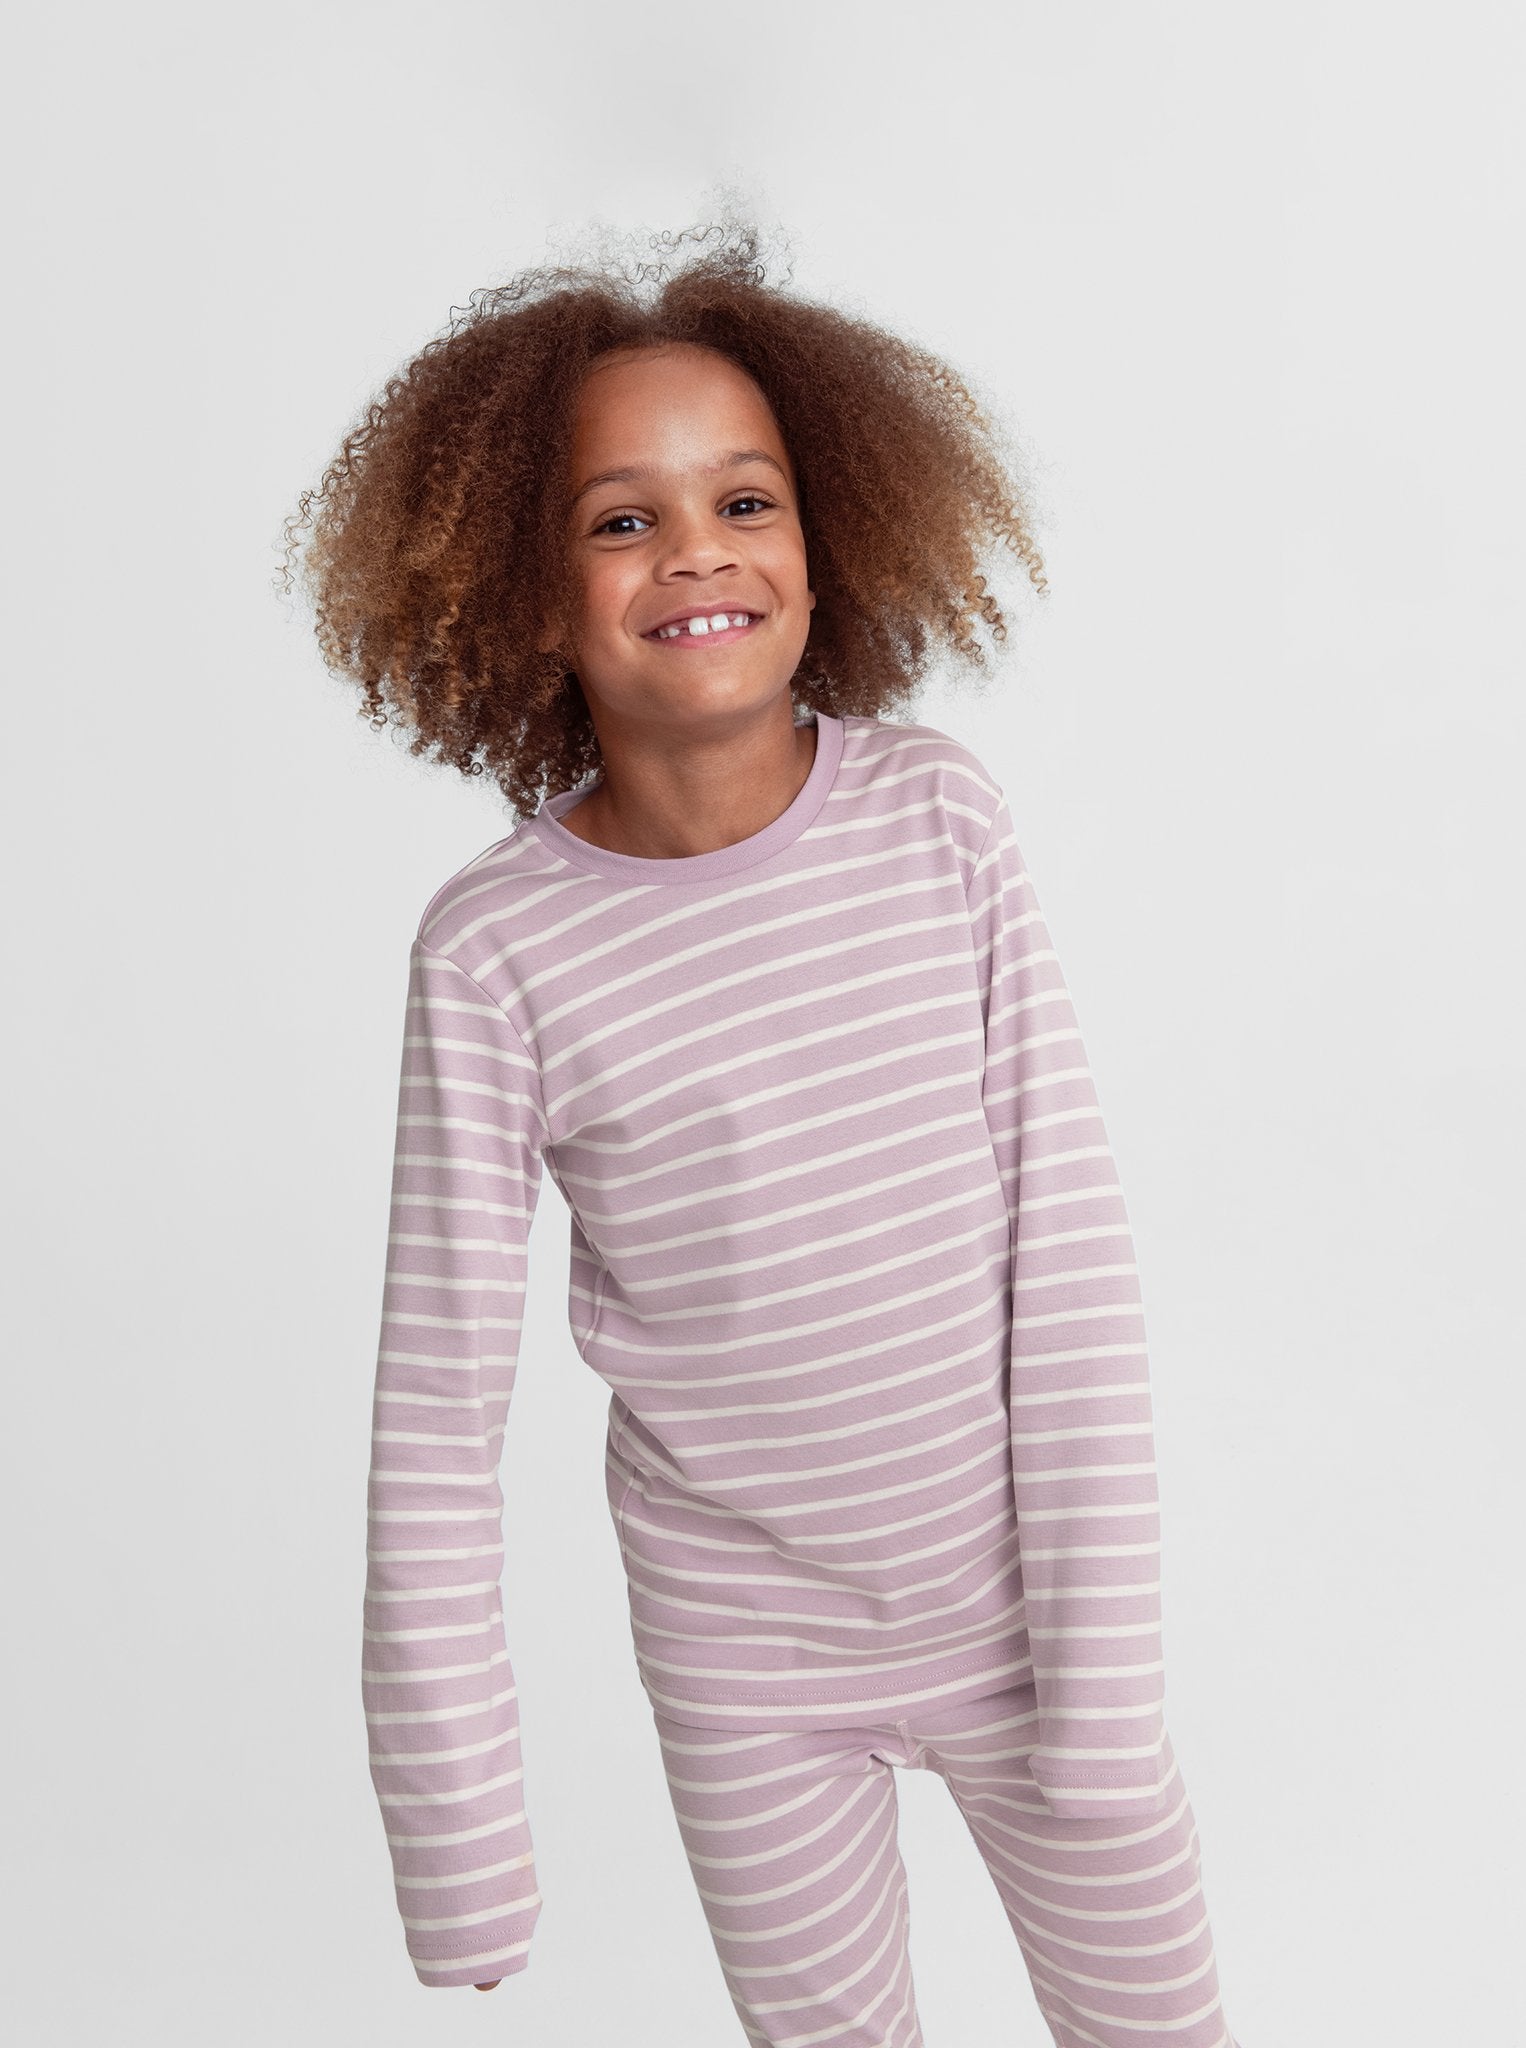  Organic Striped Pink Kids Top from Polarn O. Pyret Kidswear. Made with 100% organic cotton.